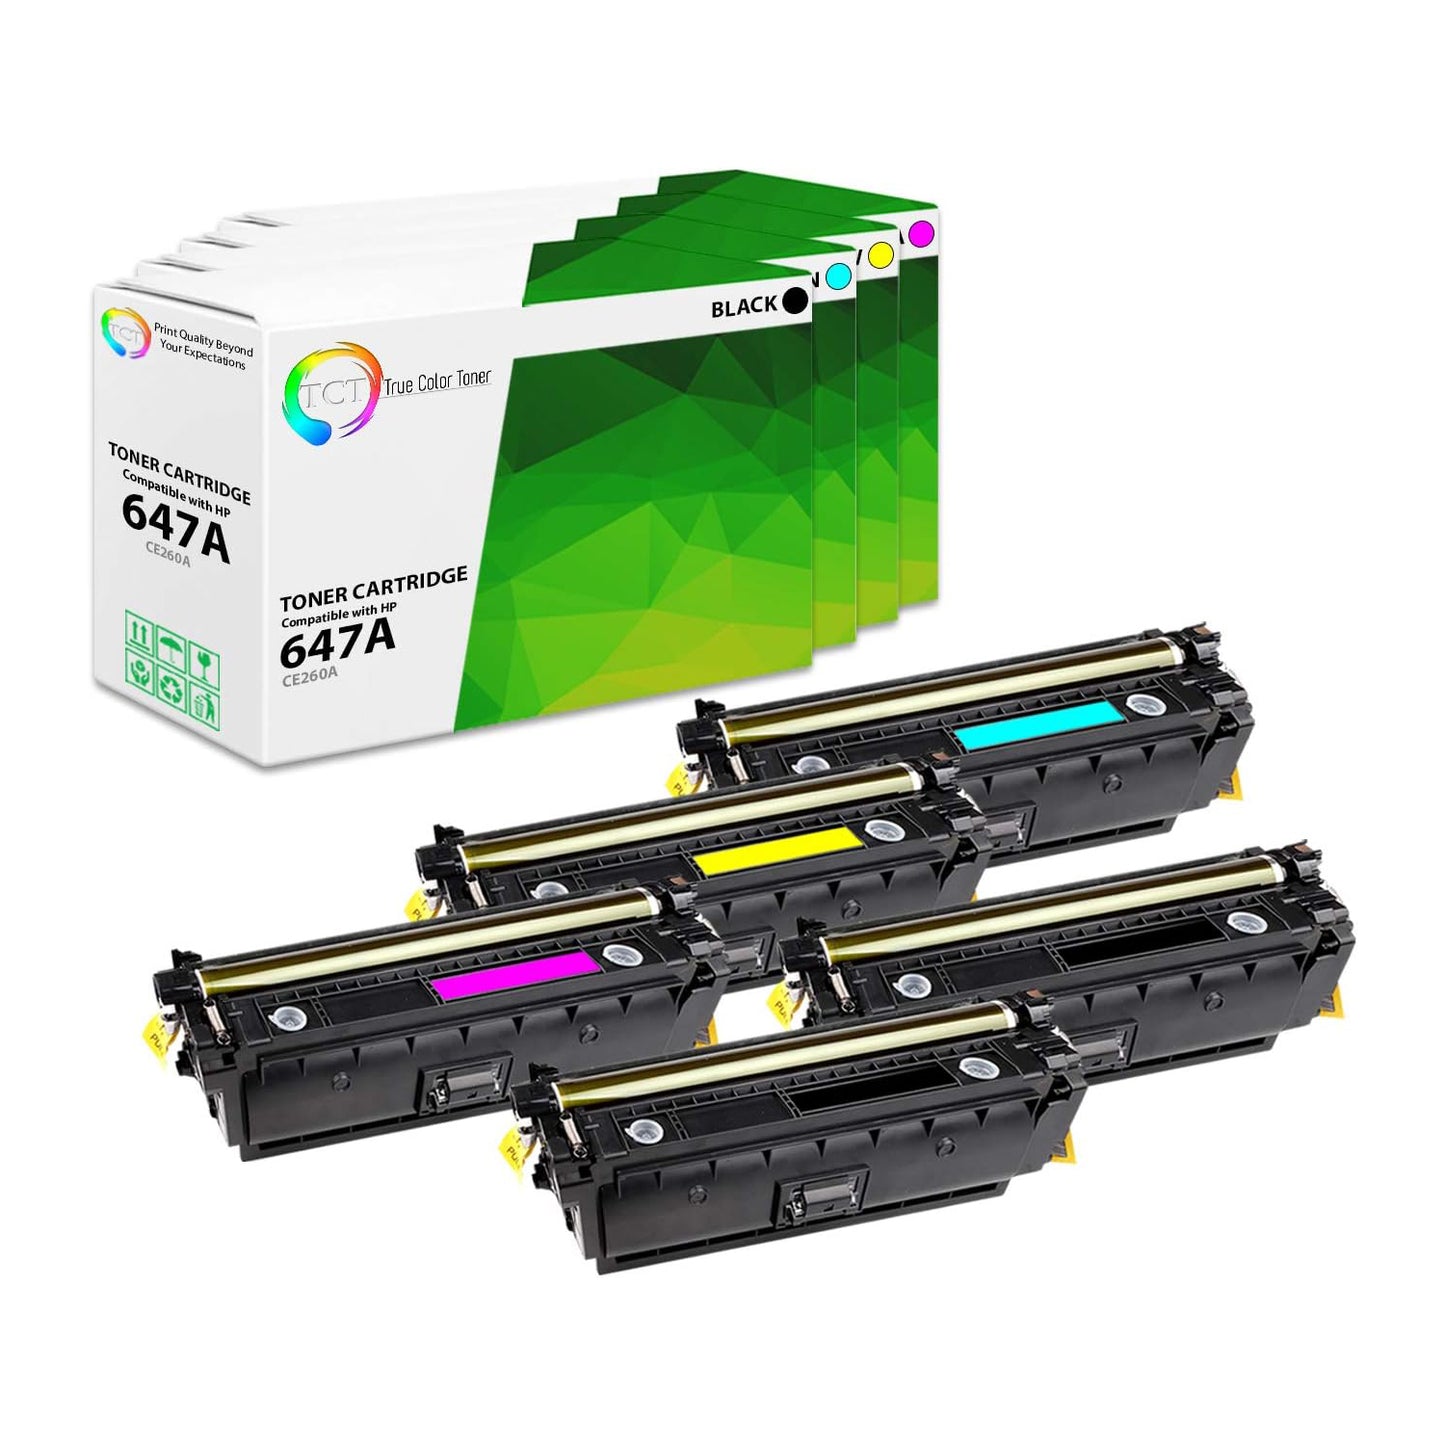 TCT Compatible Toner Cartridge Replacement for the HP 647A Series - 5 Pack (BK, C, M, Y)